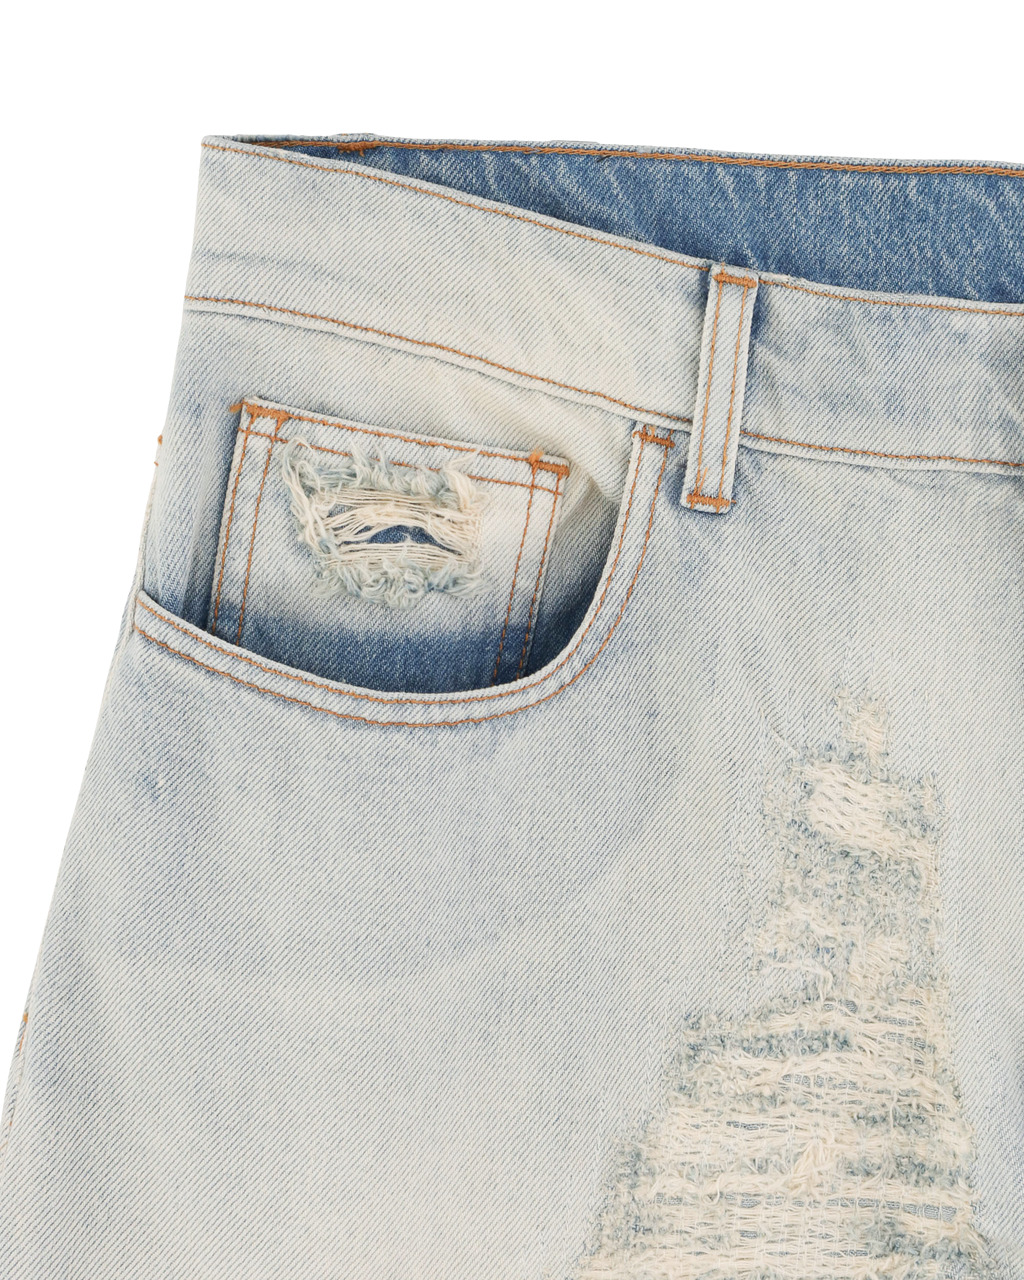 DESTROYED EMBROIDERY JEAN - 12